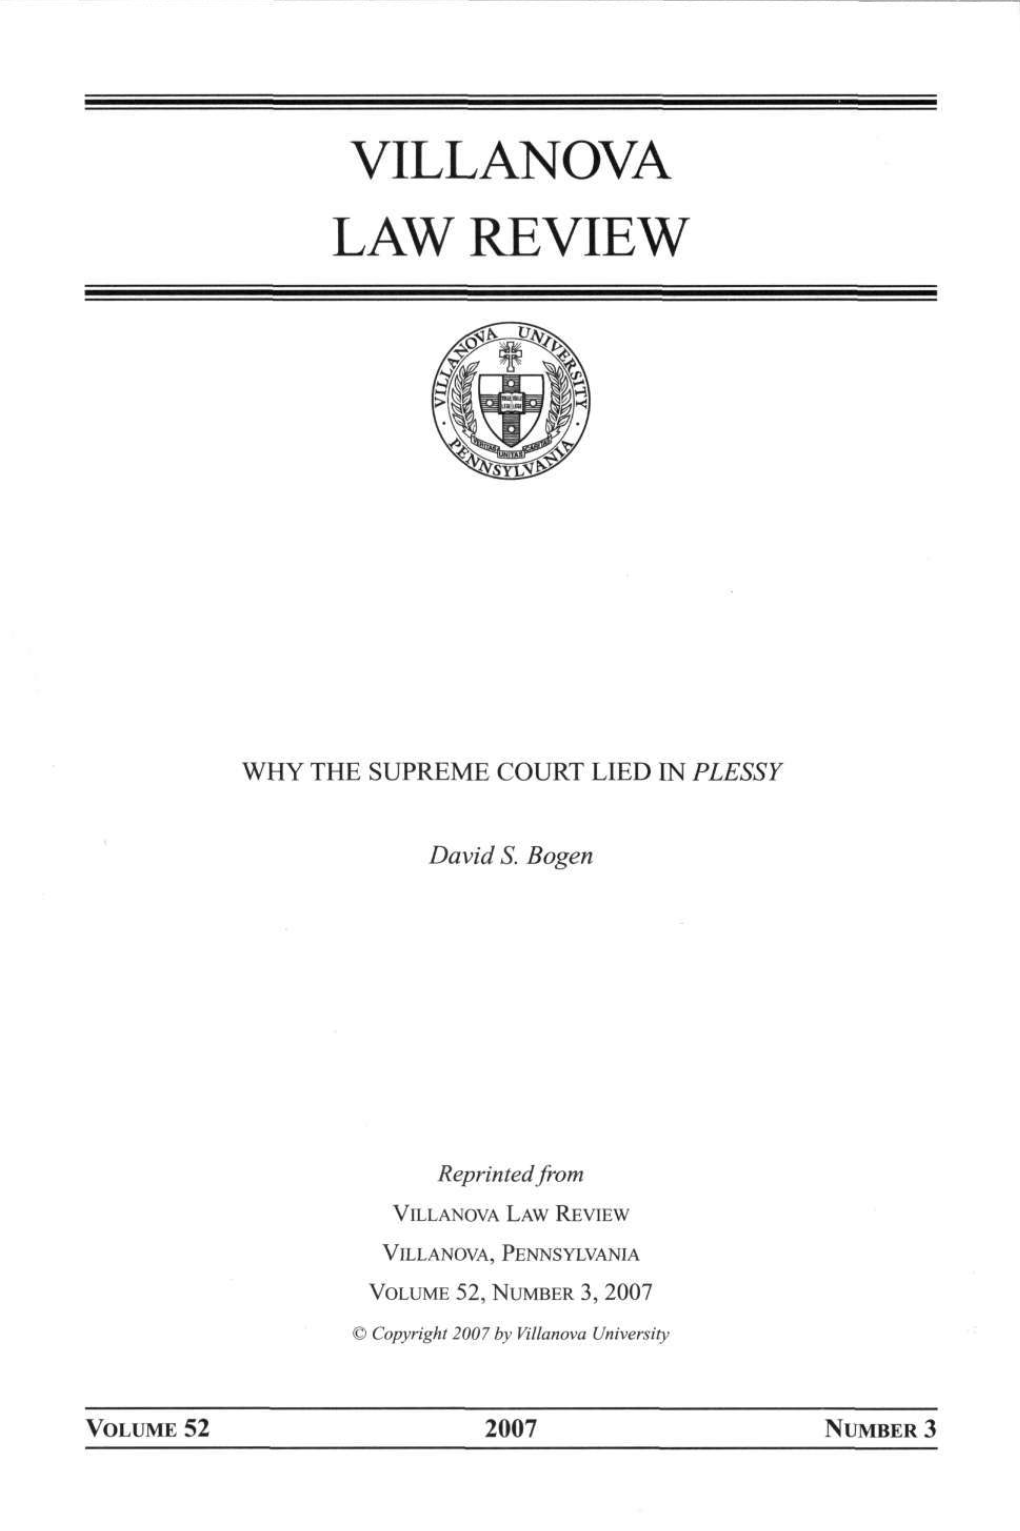 "Why the Supreme Court Lied in Plessy," Villanova Law Review 52:3